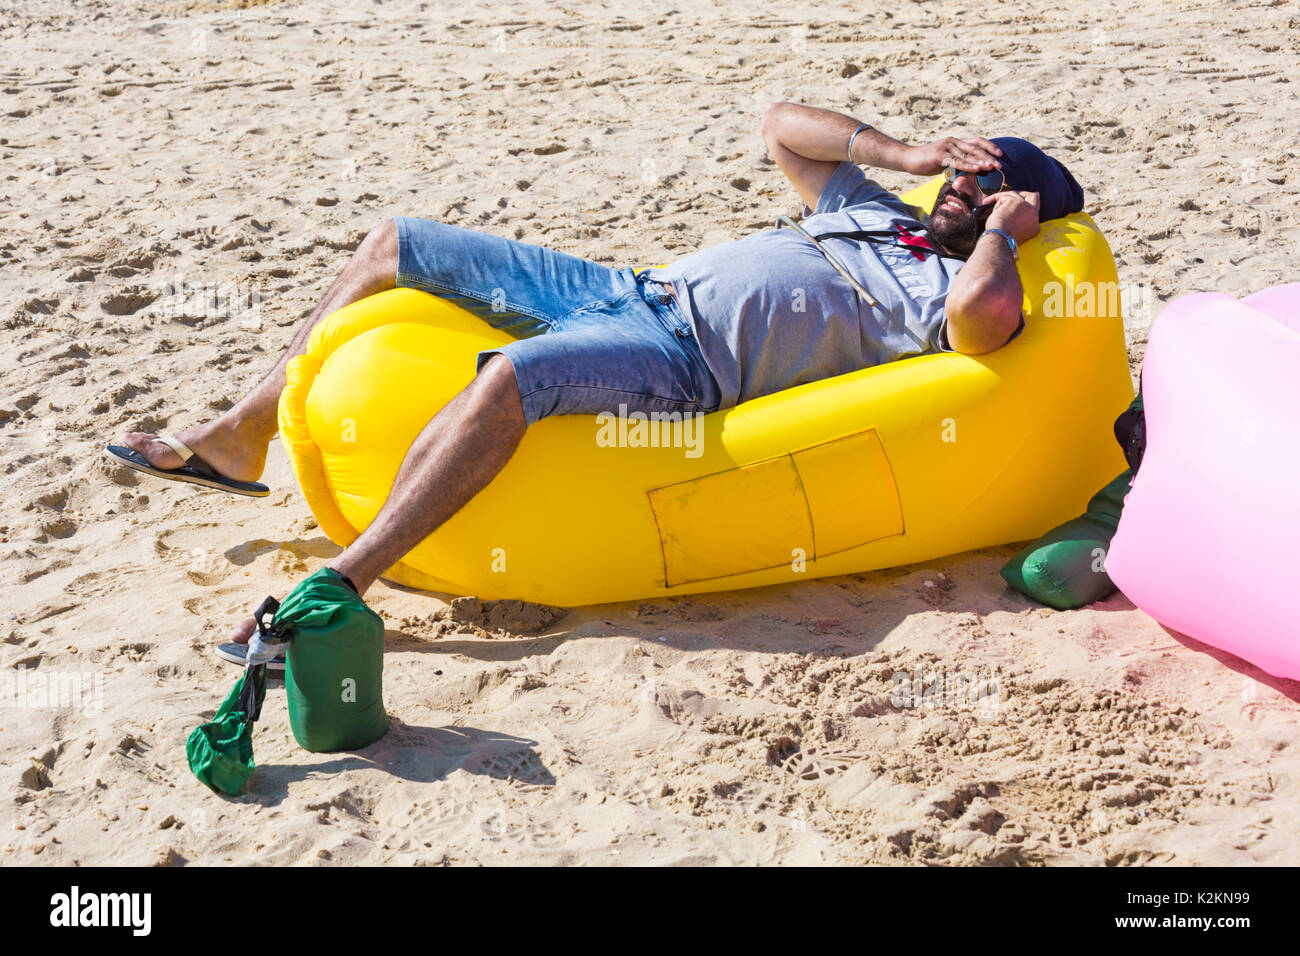 Bournemouth, Dorset, UK. 1st Sep, 2017. UK weather: lovely warm sunny day at Bournemouth beach on the South Coast. Man relaxing on yellow inflatable couch lounger talking on mobile phone. Credit: Carolyn Jenkins/Alamy Live News Stock Photo